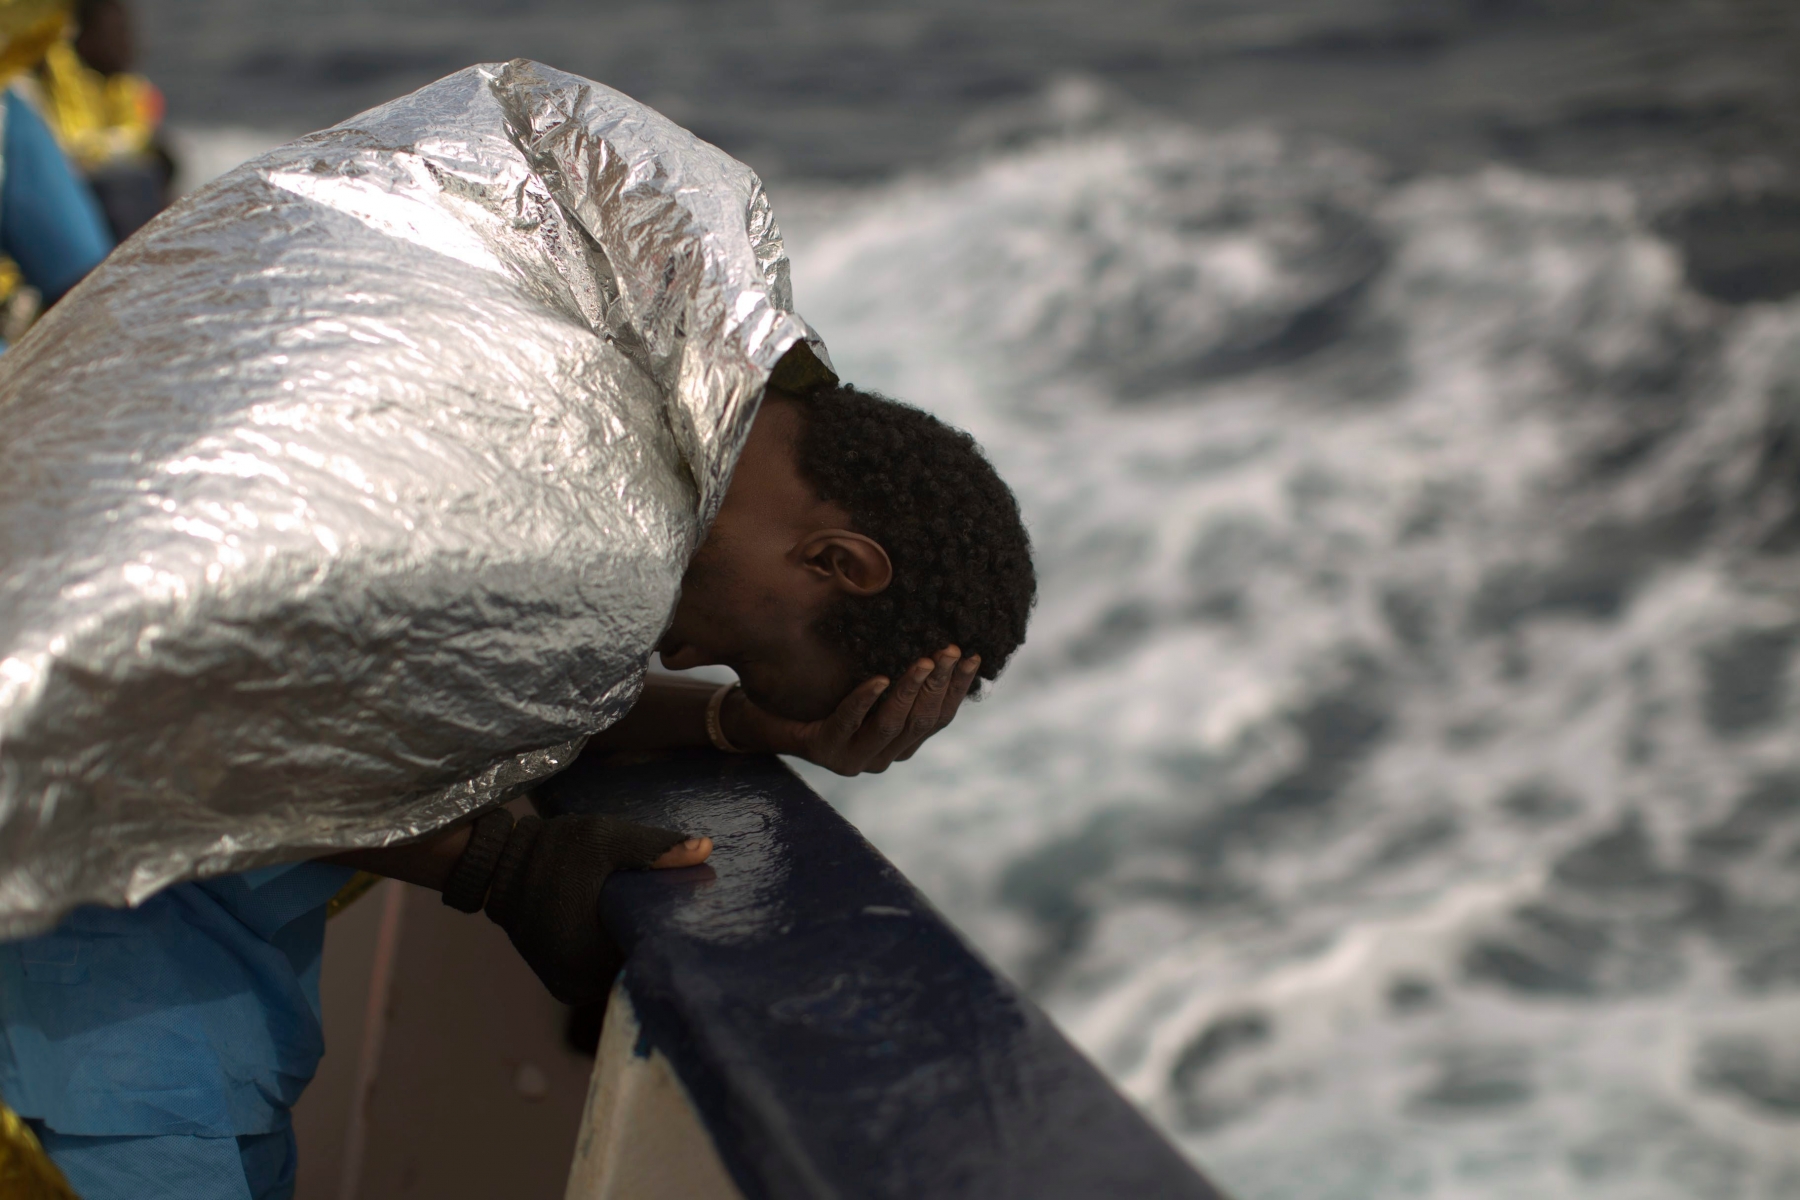 A sub-Saharan migrant holds his head, on the deck of the Golfo Azzurro boat after he was rescued from a rubber boat by members of Proactive Open Arms NGO, on the Mediterranean sea, about 24 miles north of Sabratha, Libya, Saturday, Jan. 28, 2017. (AP Photo/Emilio Morenatti) Pictures Of The Week Photo Gallery